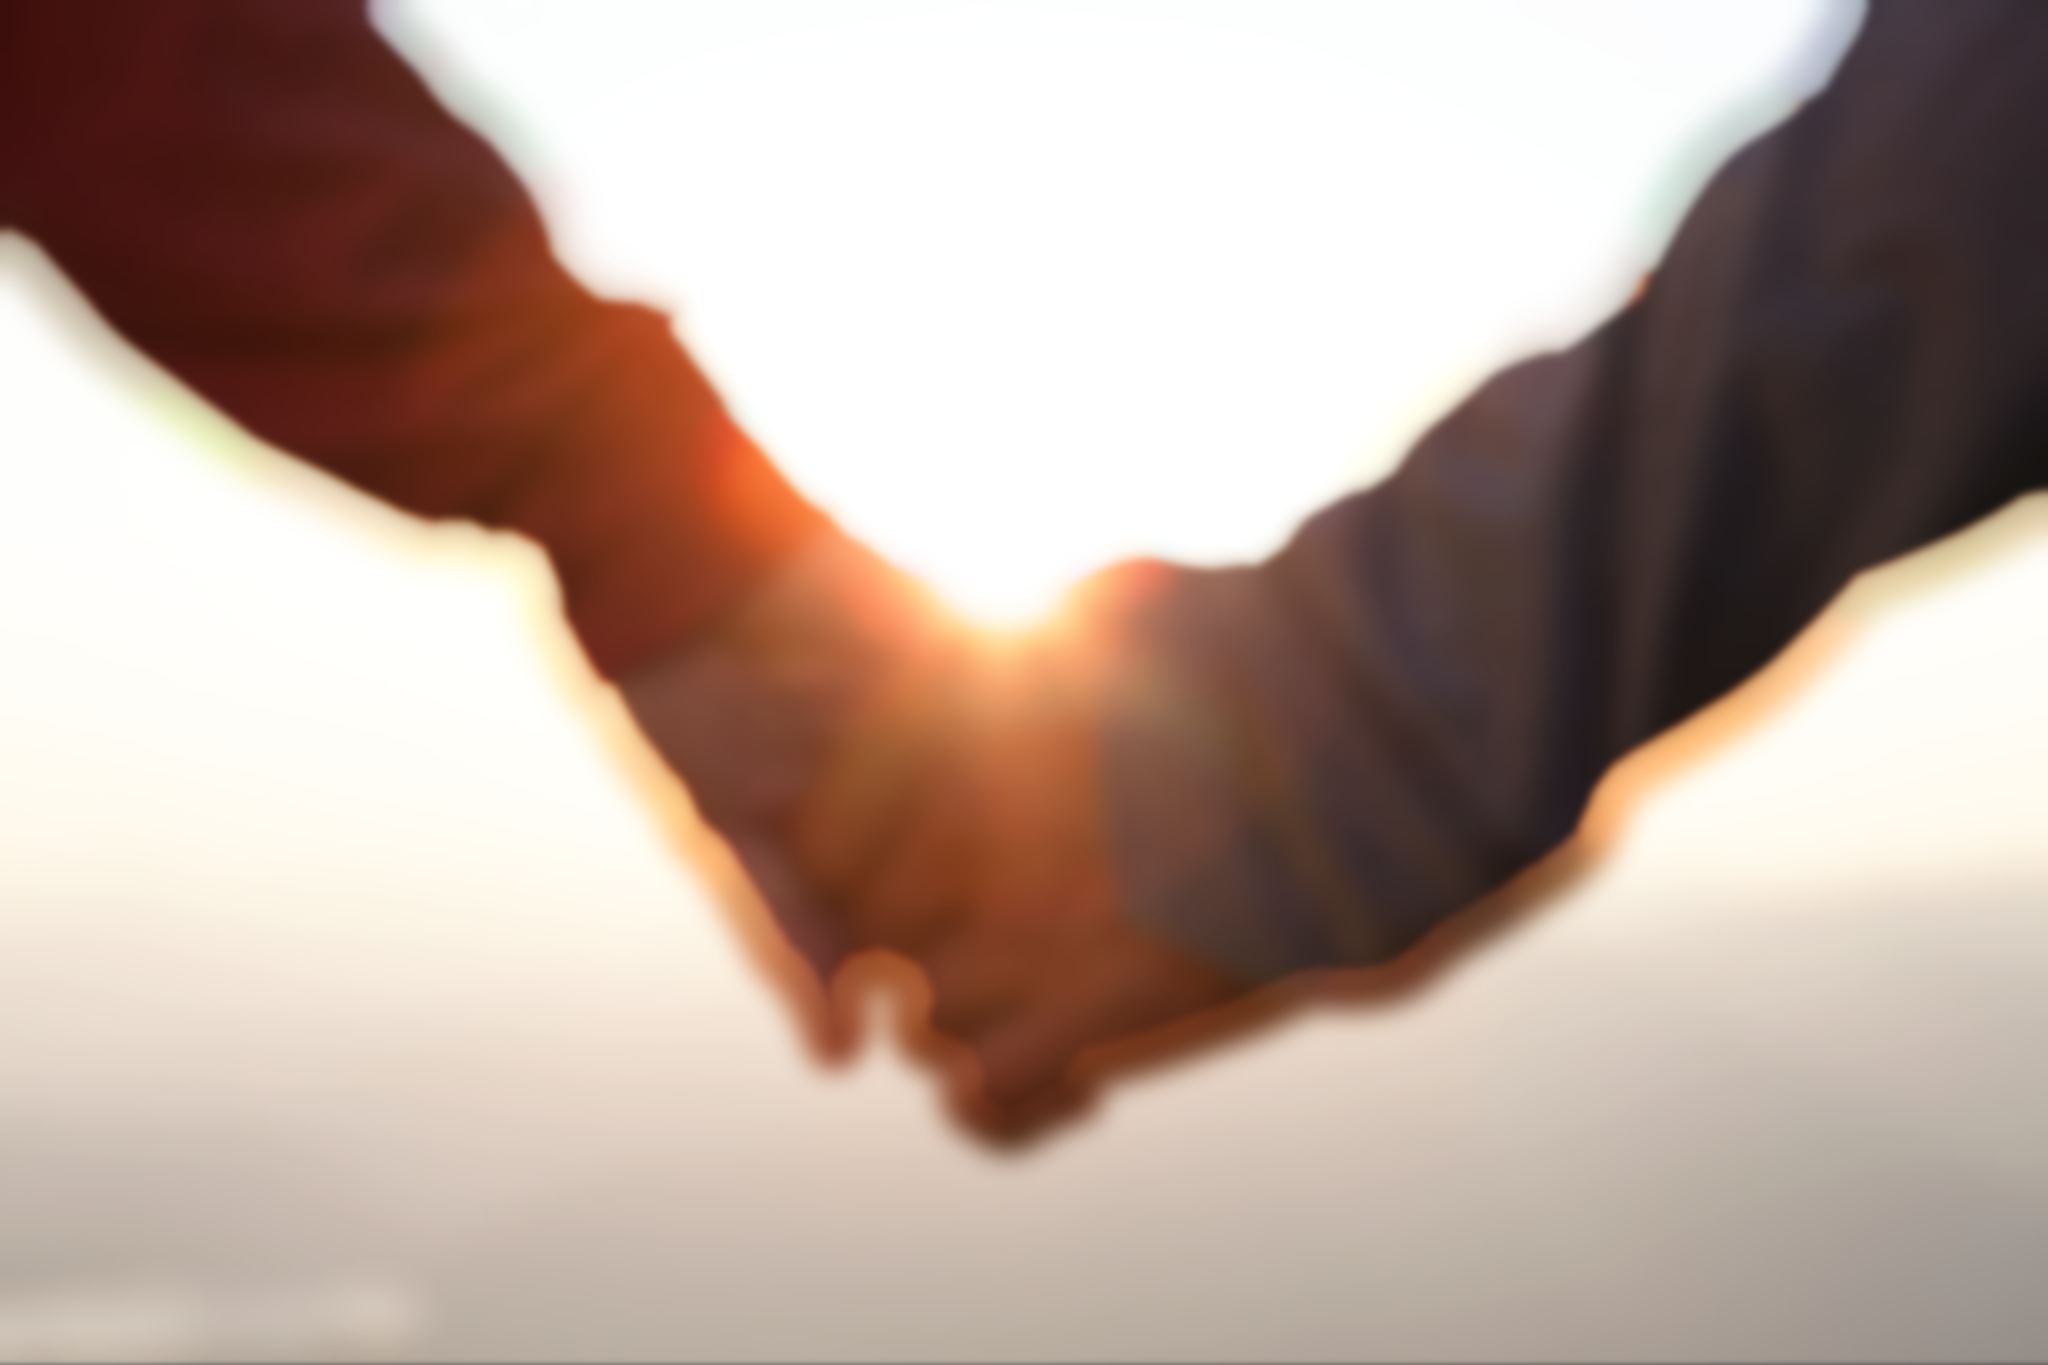 blurred image of two hands holding on a beach